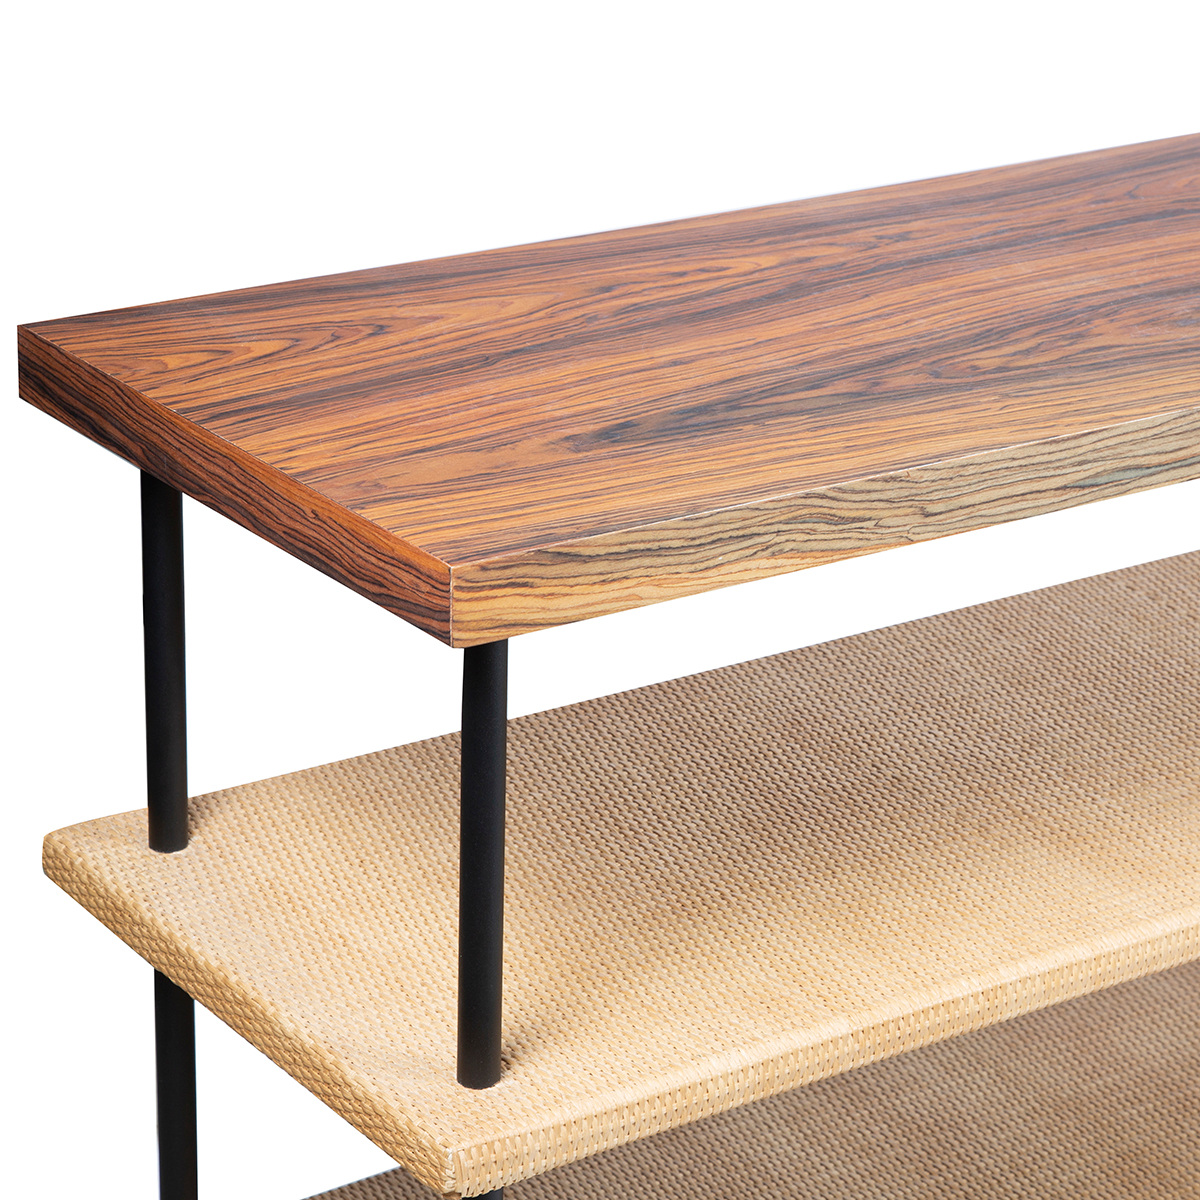 Console Table Essence, Rosewood - L150 x W40 x H80 cm - Rosewood / Lacquered Wood - image 3